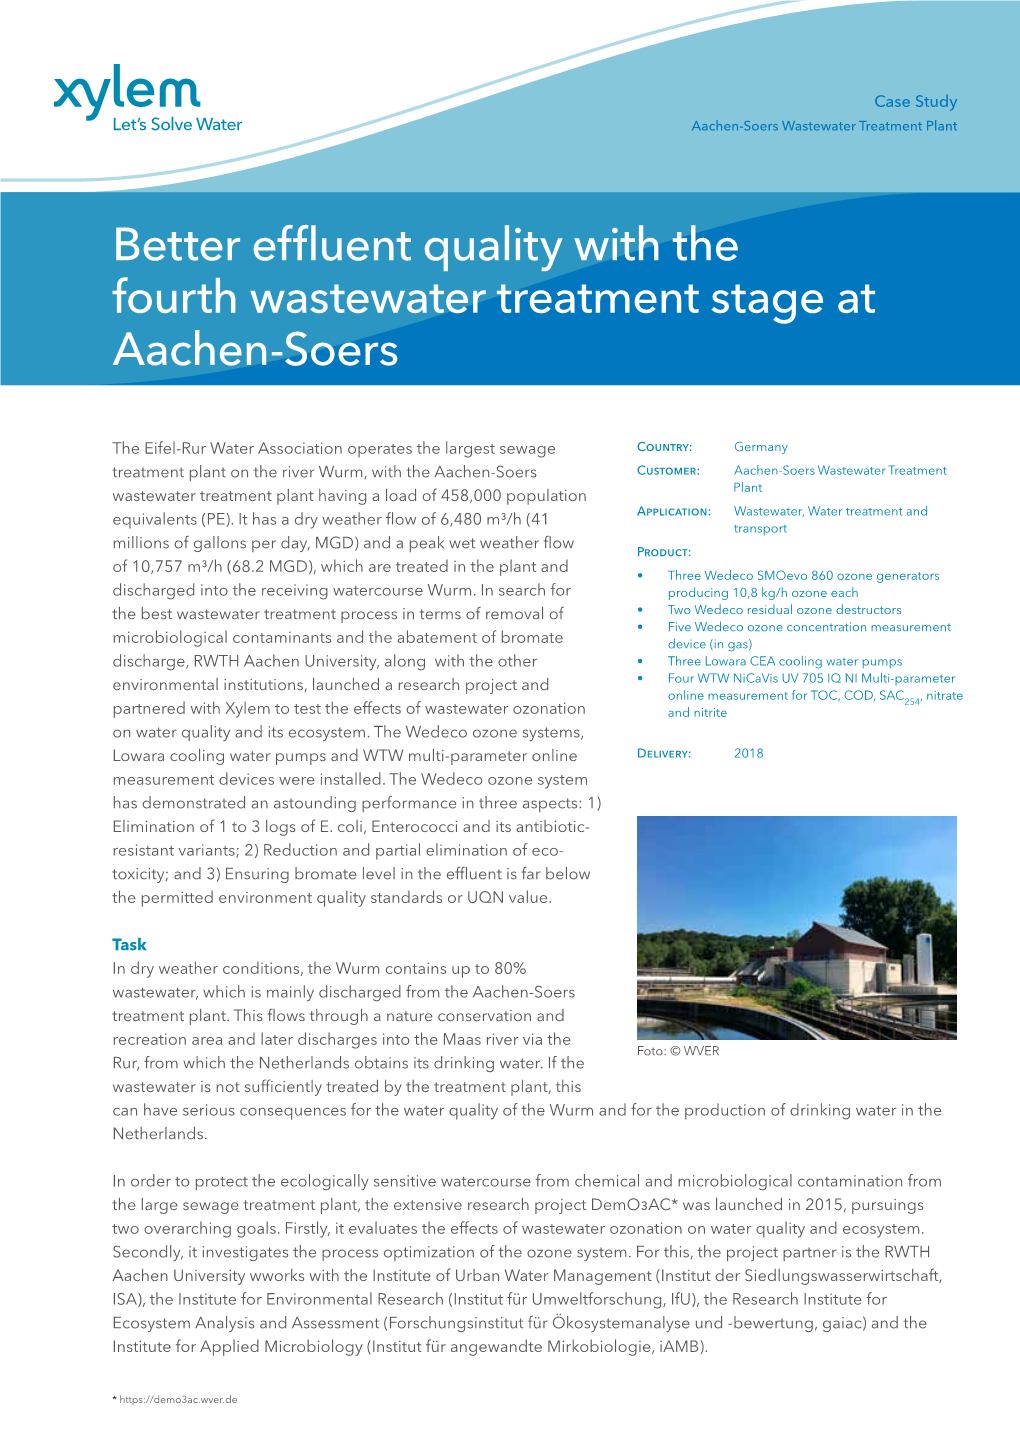 Better Effluent Quality with the Fourth Wastewater Treatment Stage at Aachen-Soers